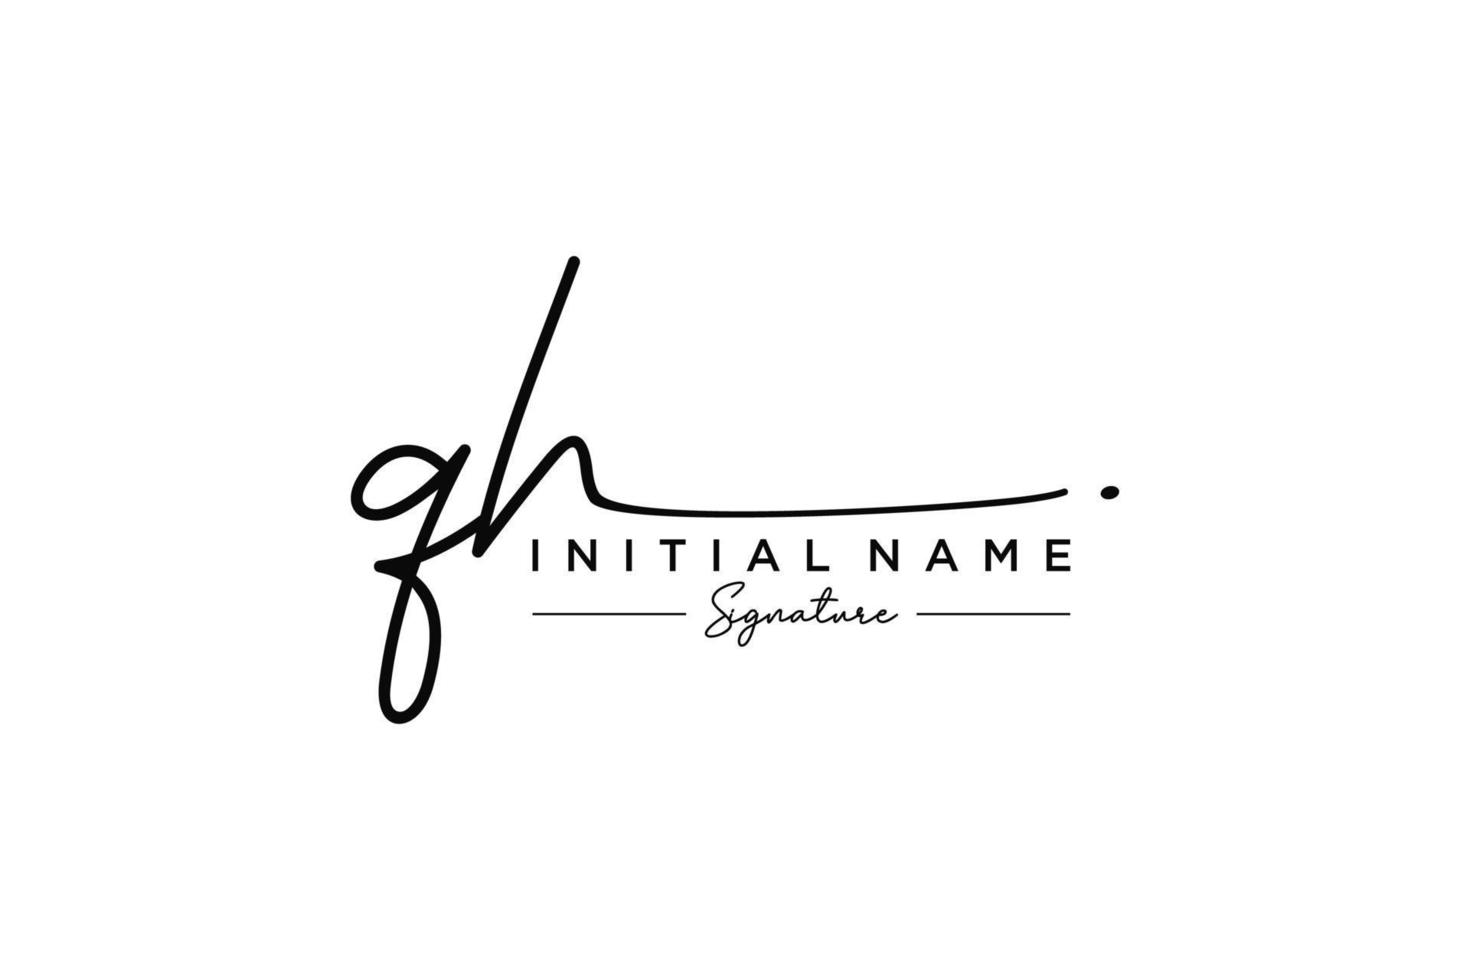 Initial QH signature logo template vector. Hand drawn Calligraphy lettering Vector illustration.